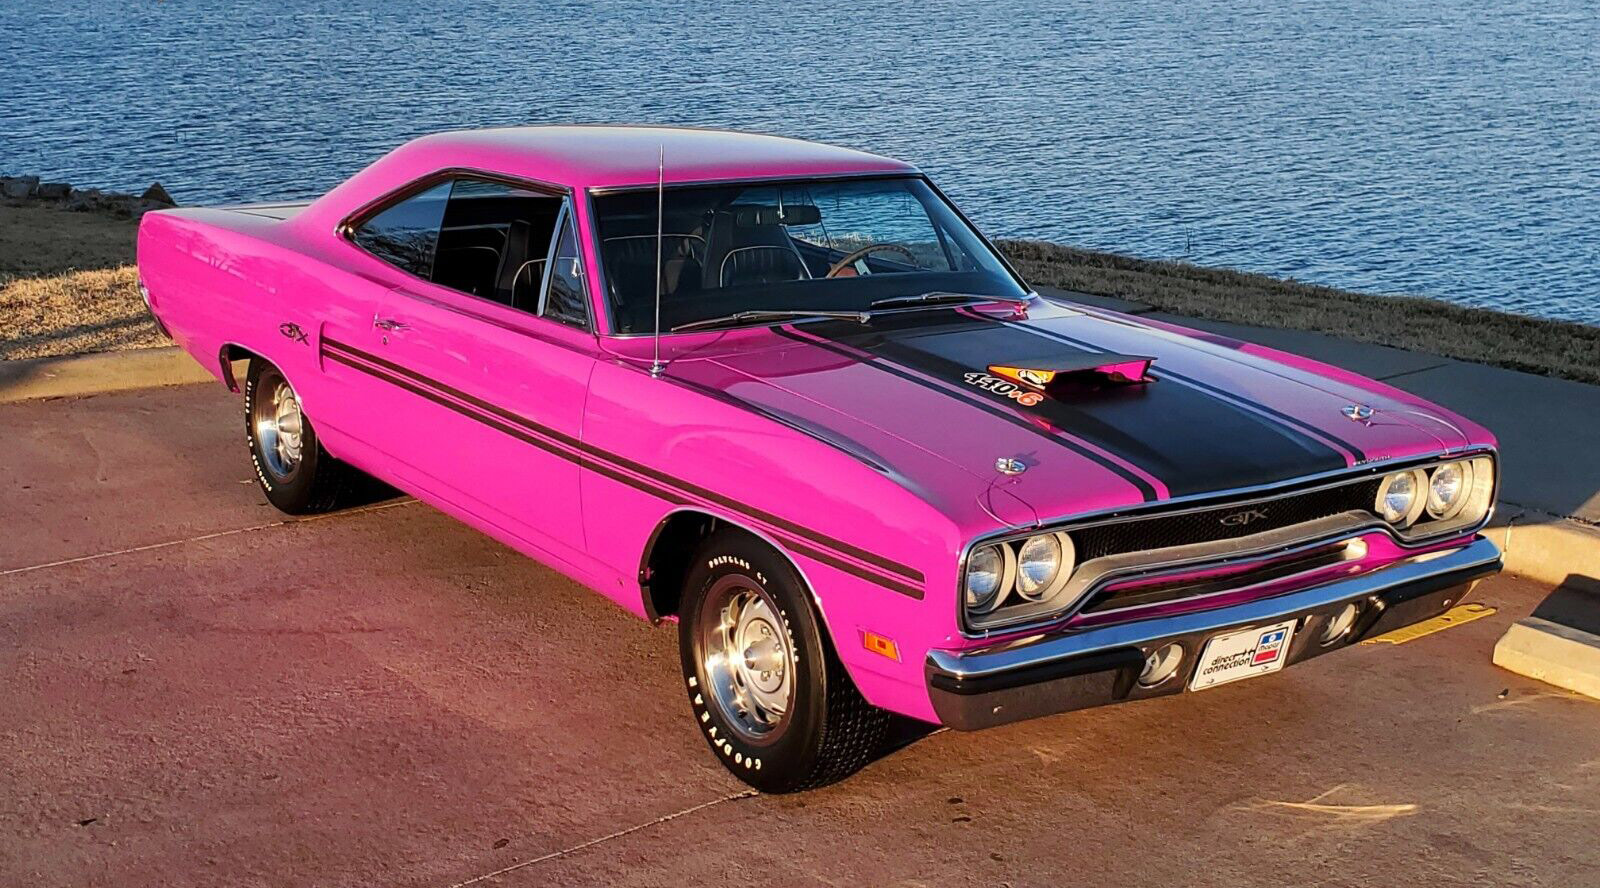 1970 Plymouth GTX front right exterior view in moulin rouge pink